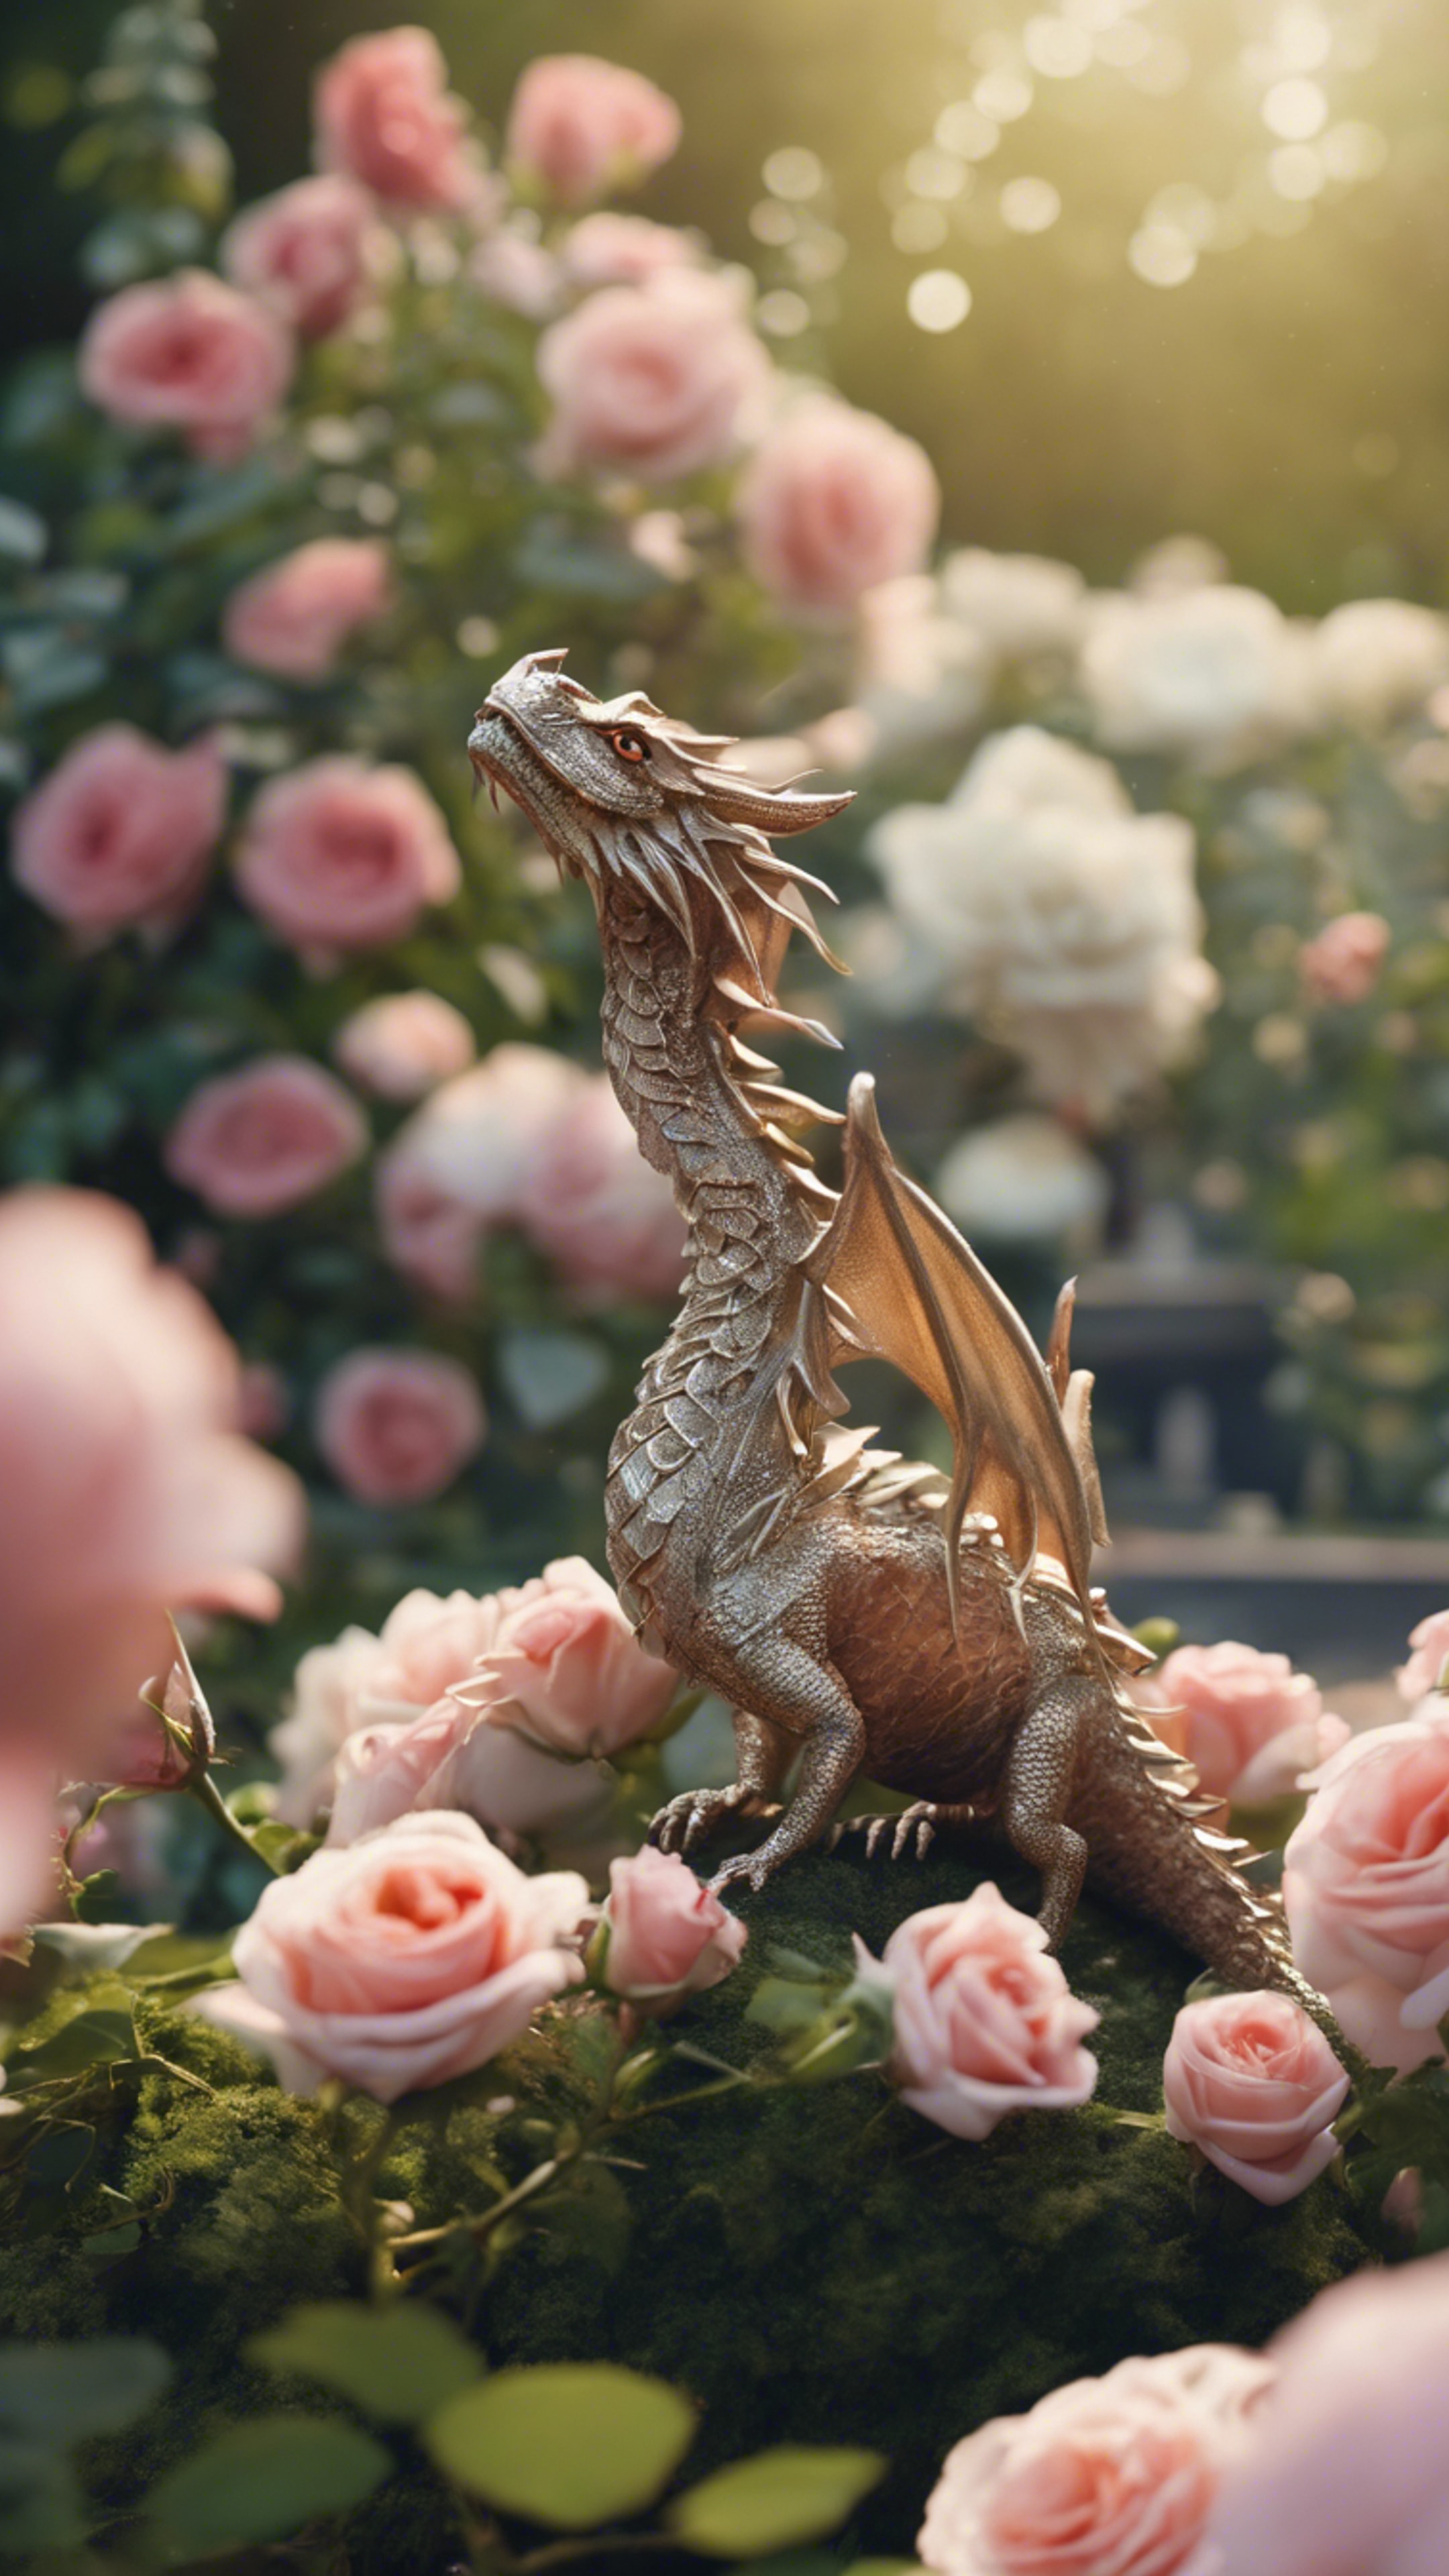 A peaceful garden scene with a tiny, delicate dragon hovering over blooming roses. 벽지[938d180fa7284dedb4af]